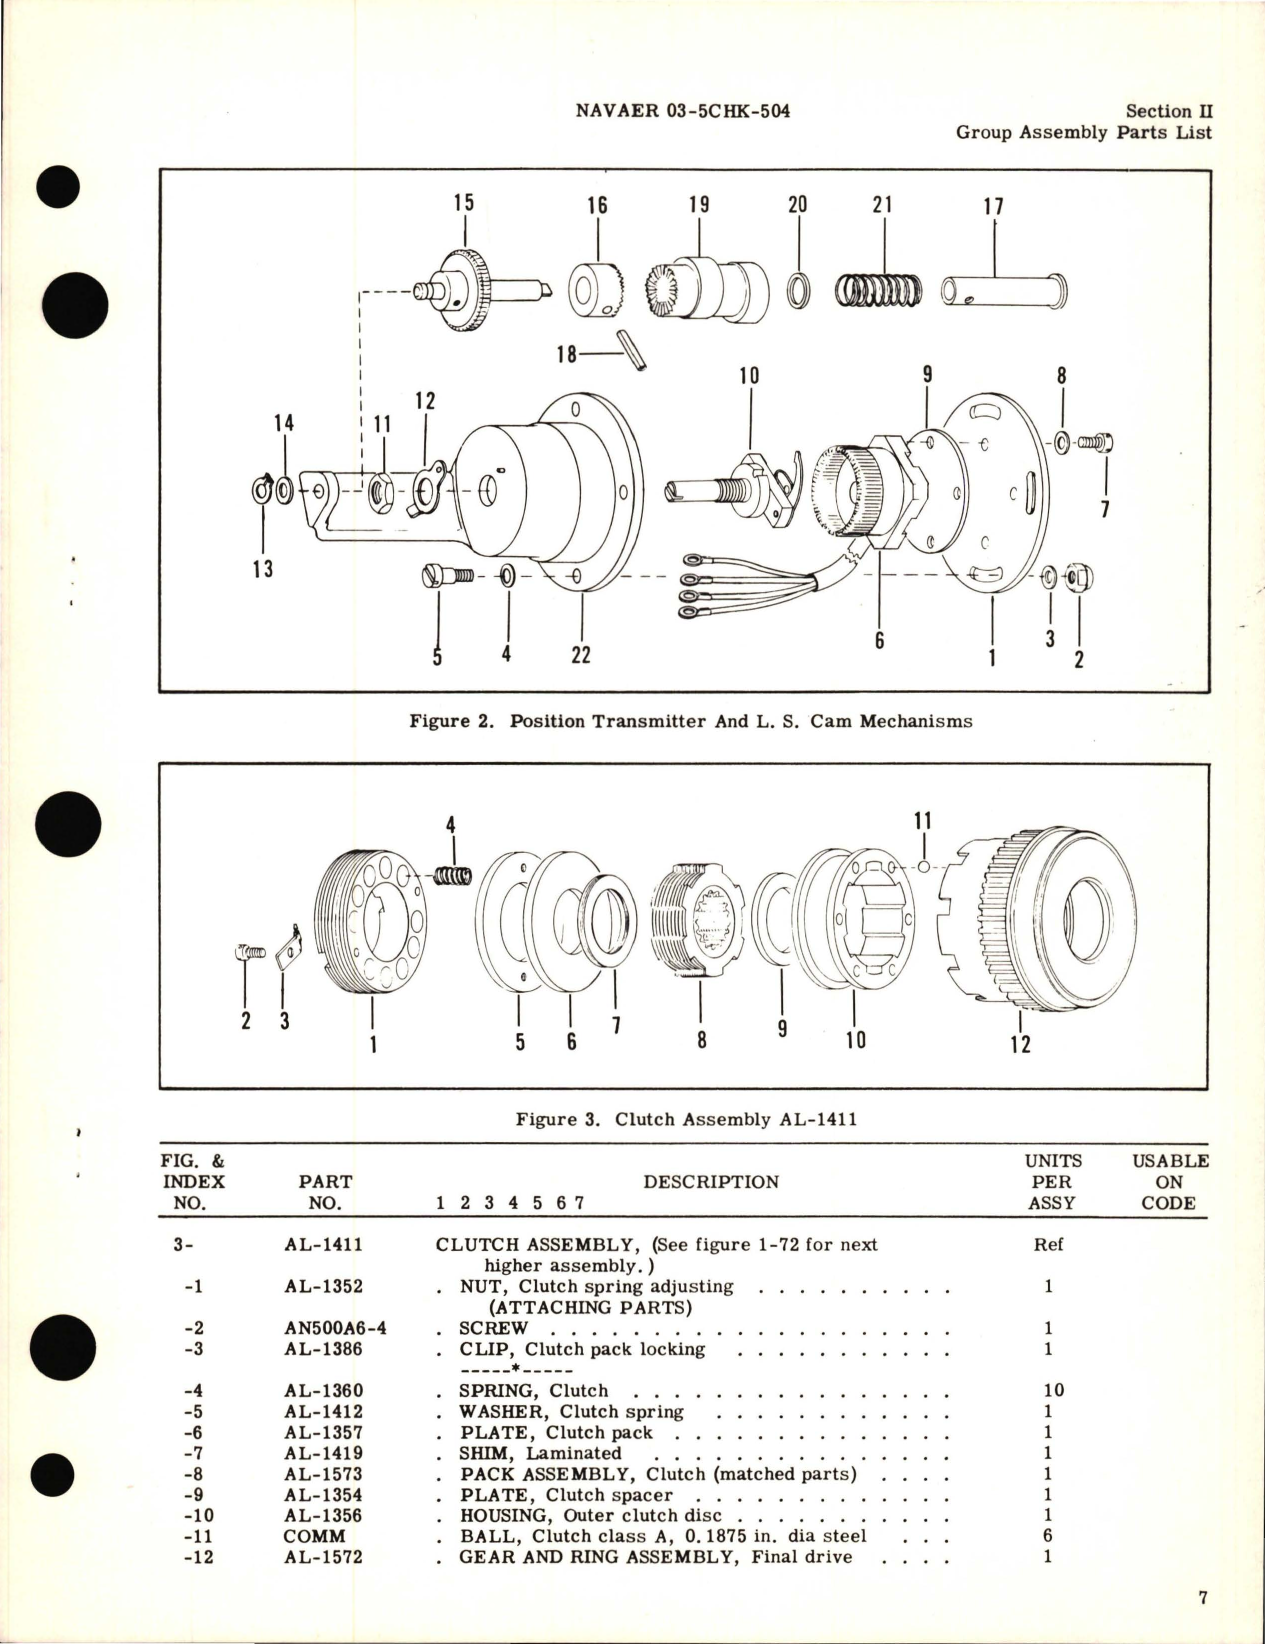 Sample page 9 from AirCorps Library document: Illustrated Parts Breakdown for Actuator Assembly - Elevator Trim Tab Part No. AL-1287-14, Type 304-1-A